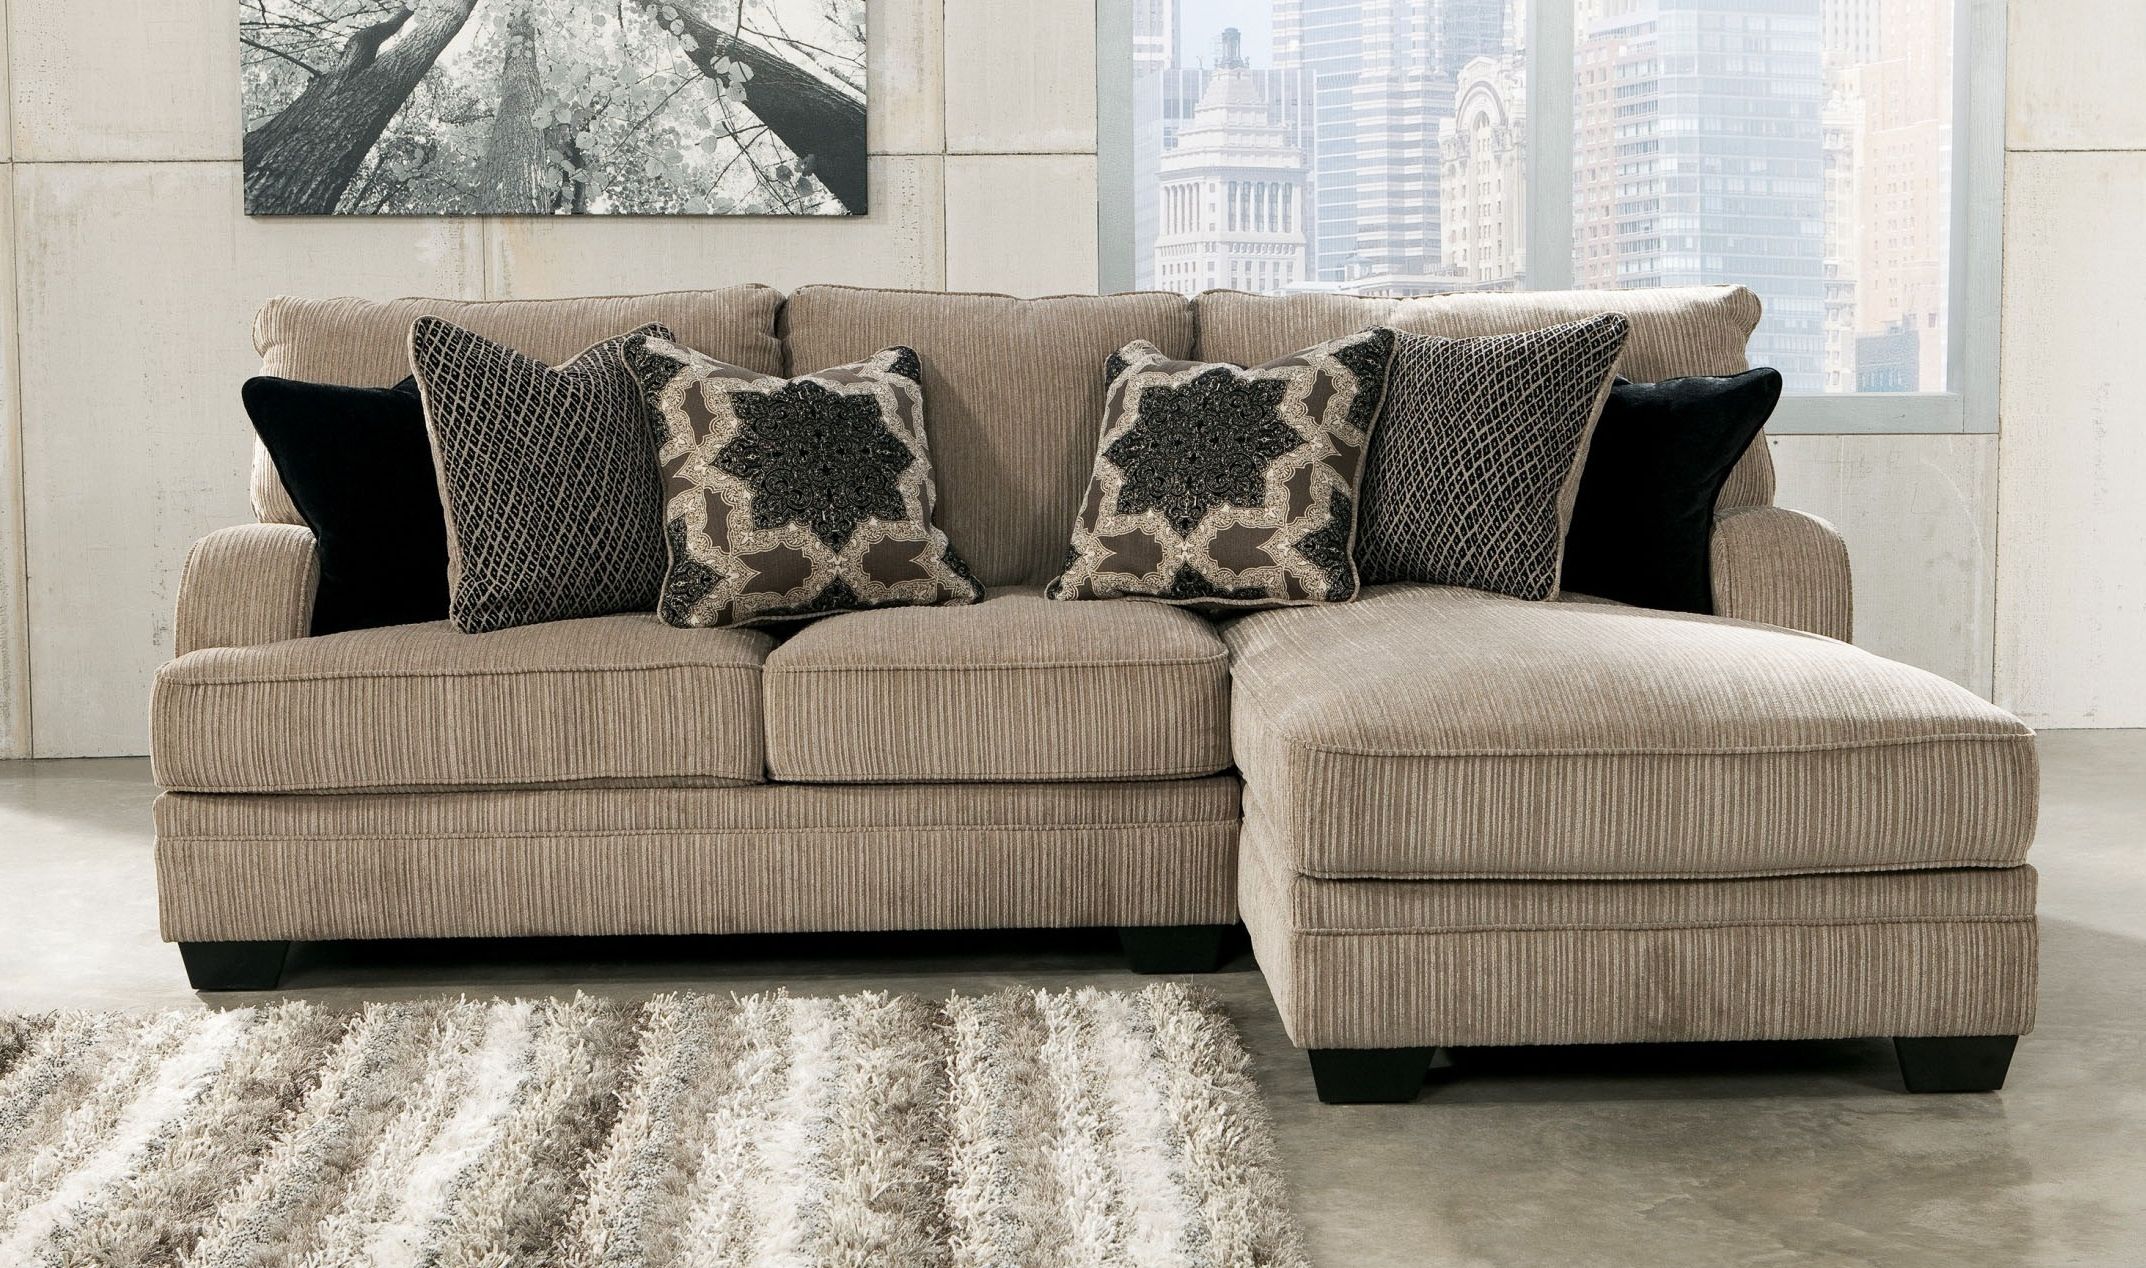 Widely Used Best Small Sectional Sofas With Chaise 81 On Wide Sectional Sofa Intended For North Carolina Sectional Sofas (View 1 of 15)